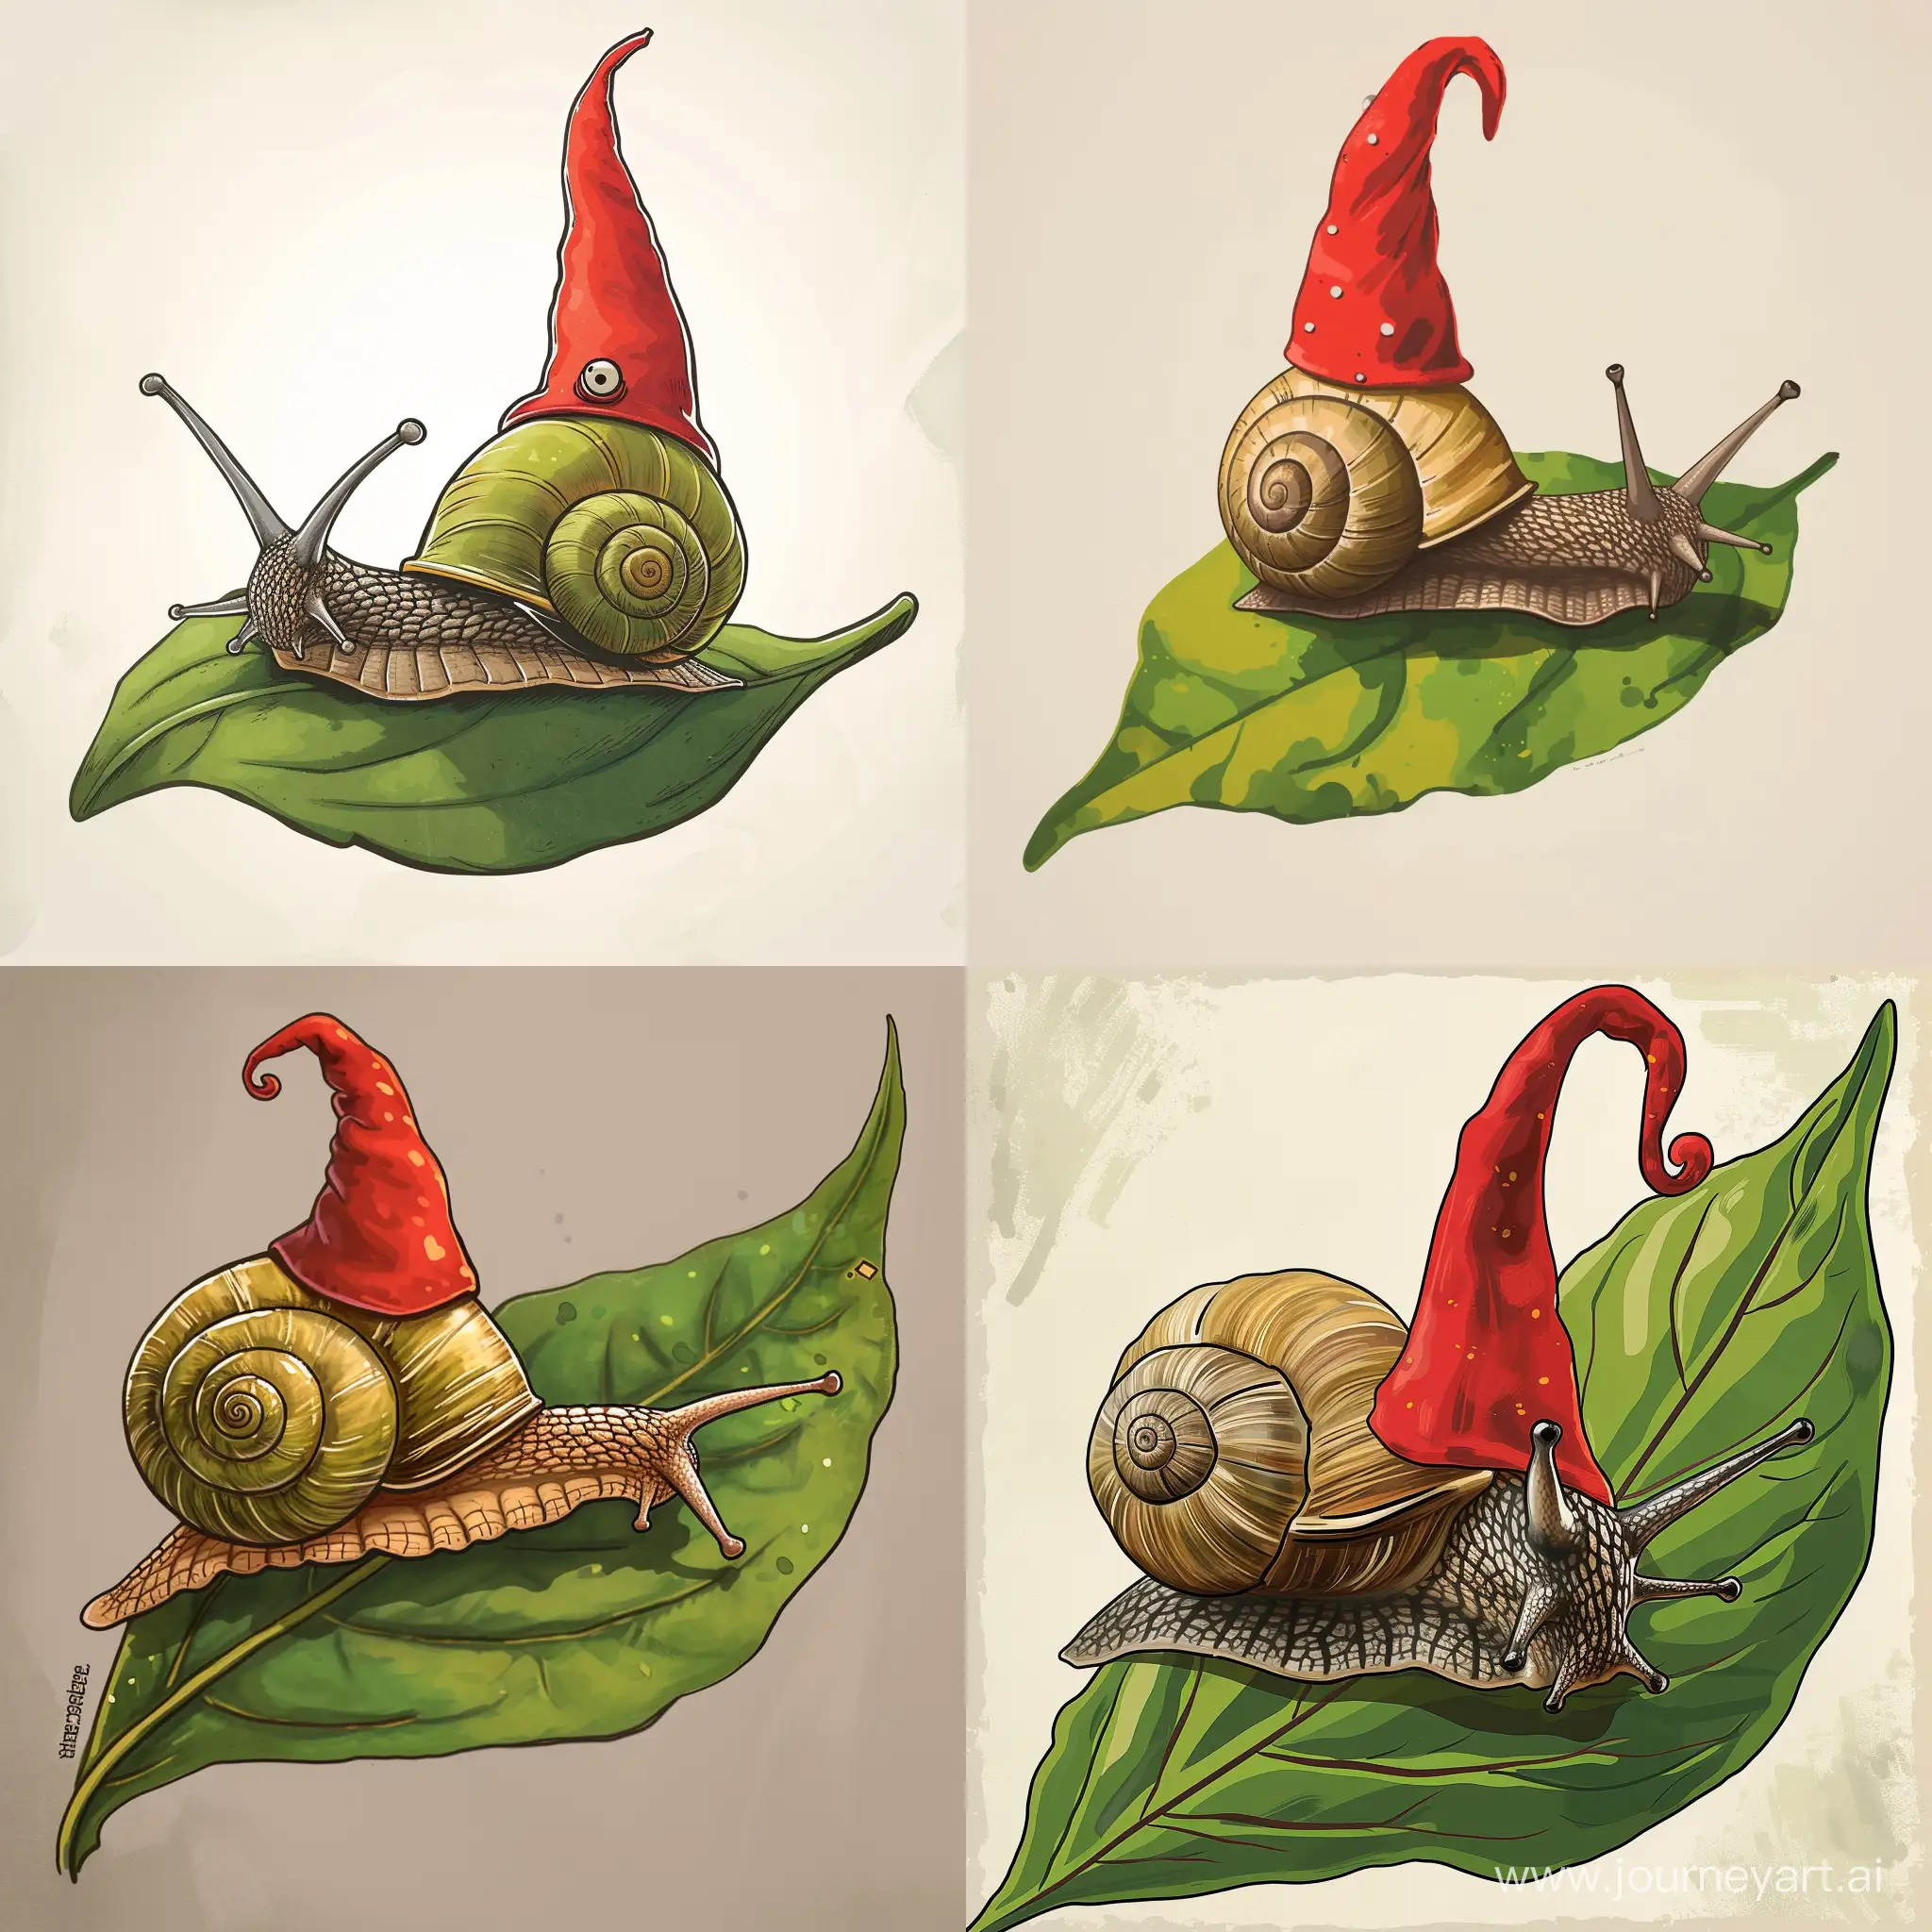 a snail with a red gnome hat on top, on a pepper leaf in cartoon style